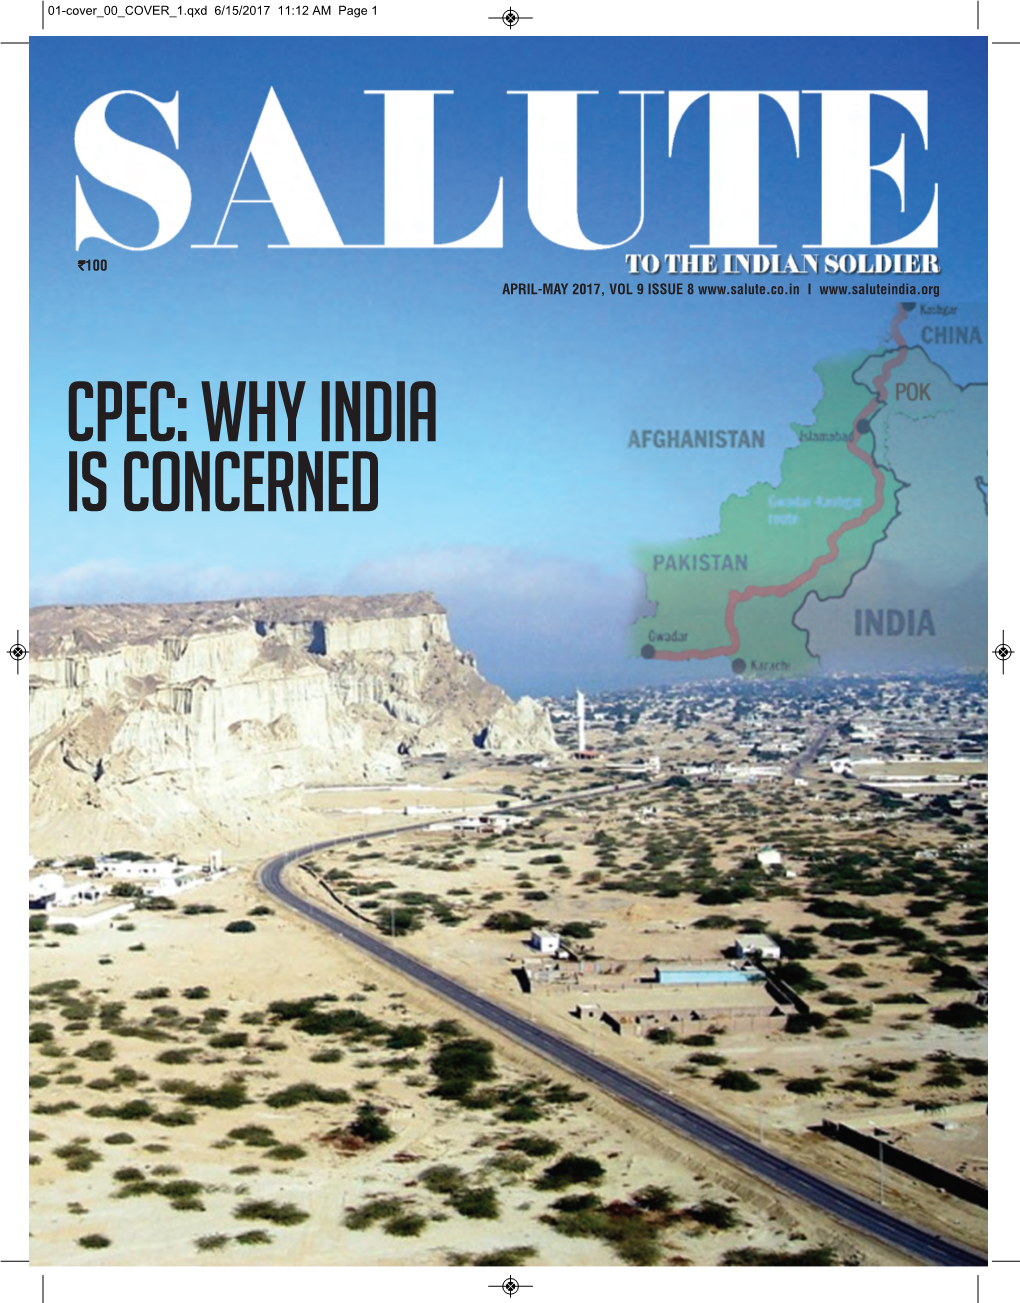 CPEC: WHY INDIA IS CONCERNED 02 AD 00 COVER 1.Qxd 6/12/2017 12:18 PM Page 1 03-Contents 03 EDIT.Qxd 6/14/2017 11:51 AM Page 3